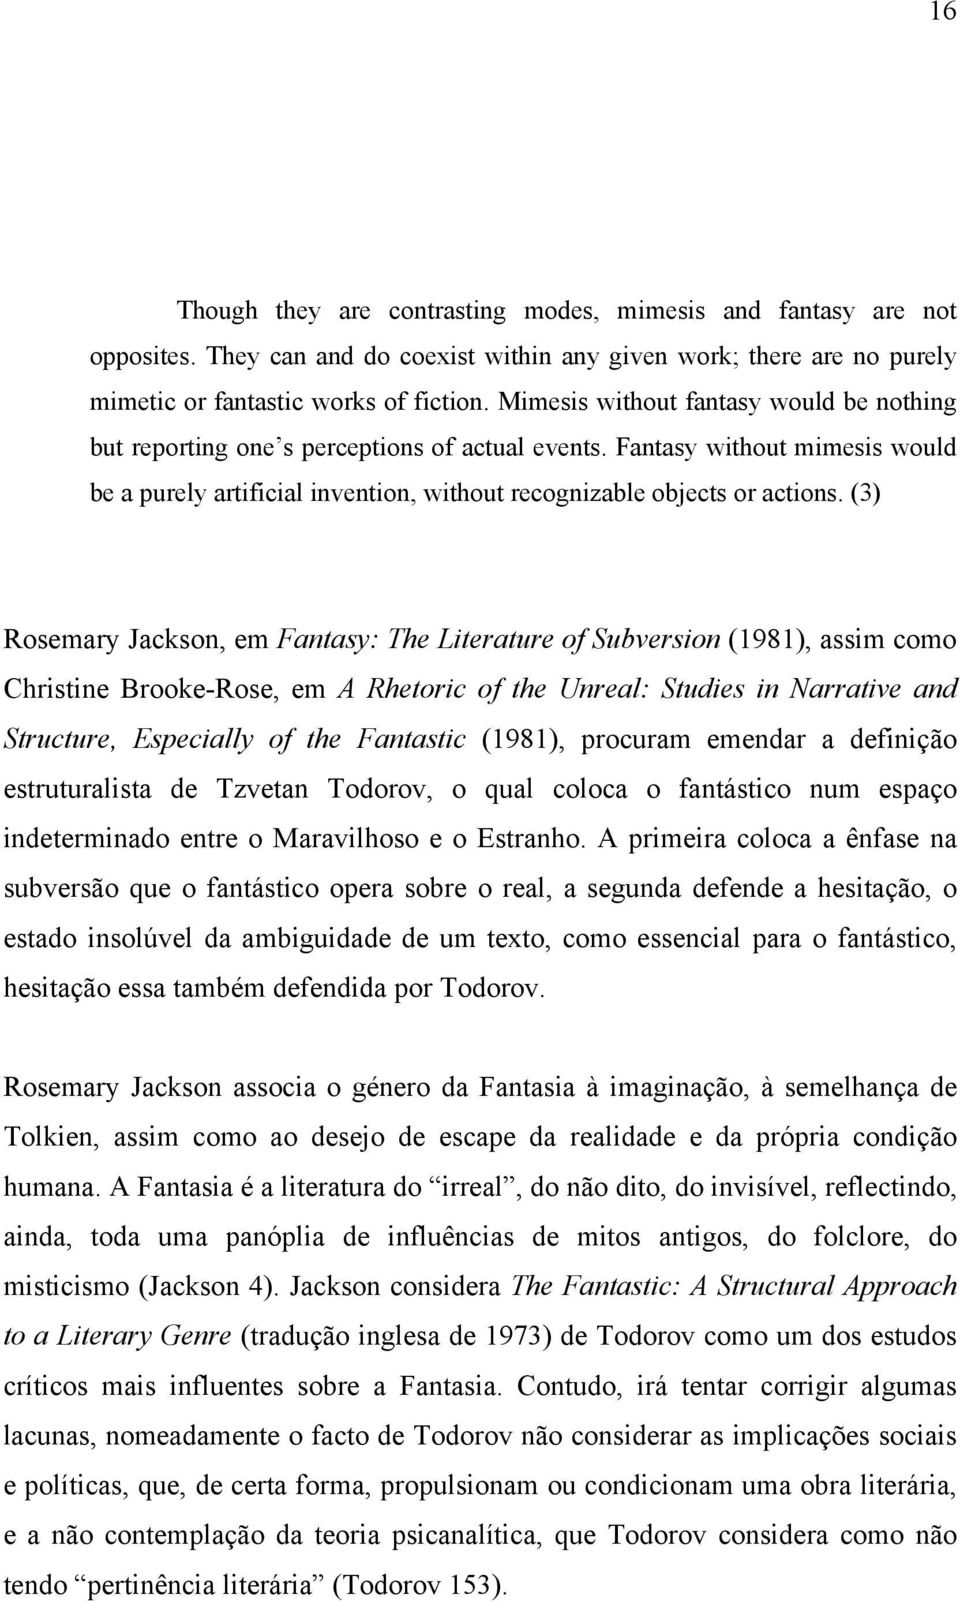 (3) Rosemary Jackson, em Fantasy: The Literature of Subversion (1981), assim como Christine Brooke-Rose, em A Rhetoric of the Unreal: Studies in Narrative and Structure, Especially of the Fantastic